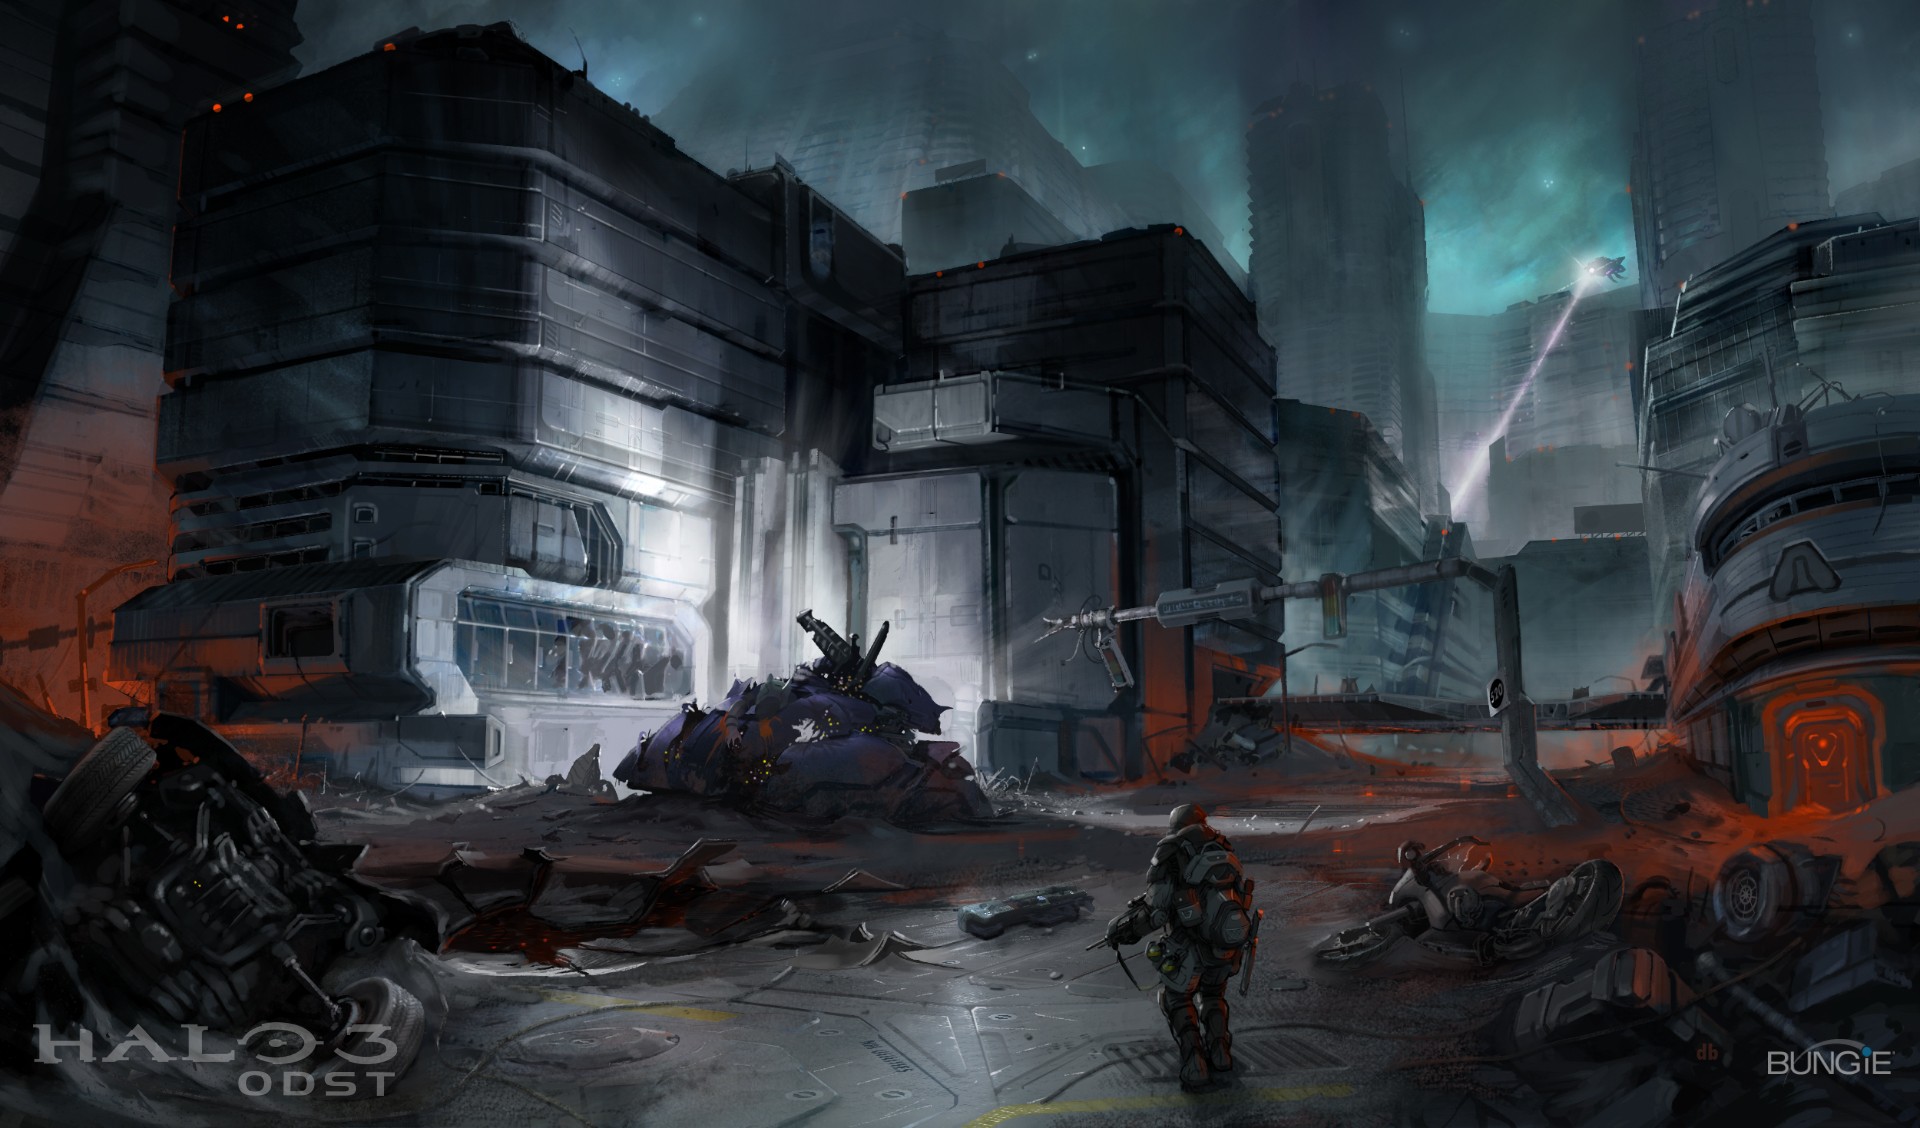 General 1920x1128 ODST video games Halo 3: ODST video game art science fiction Bungie